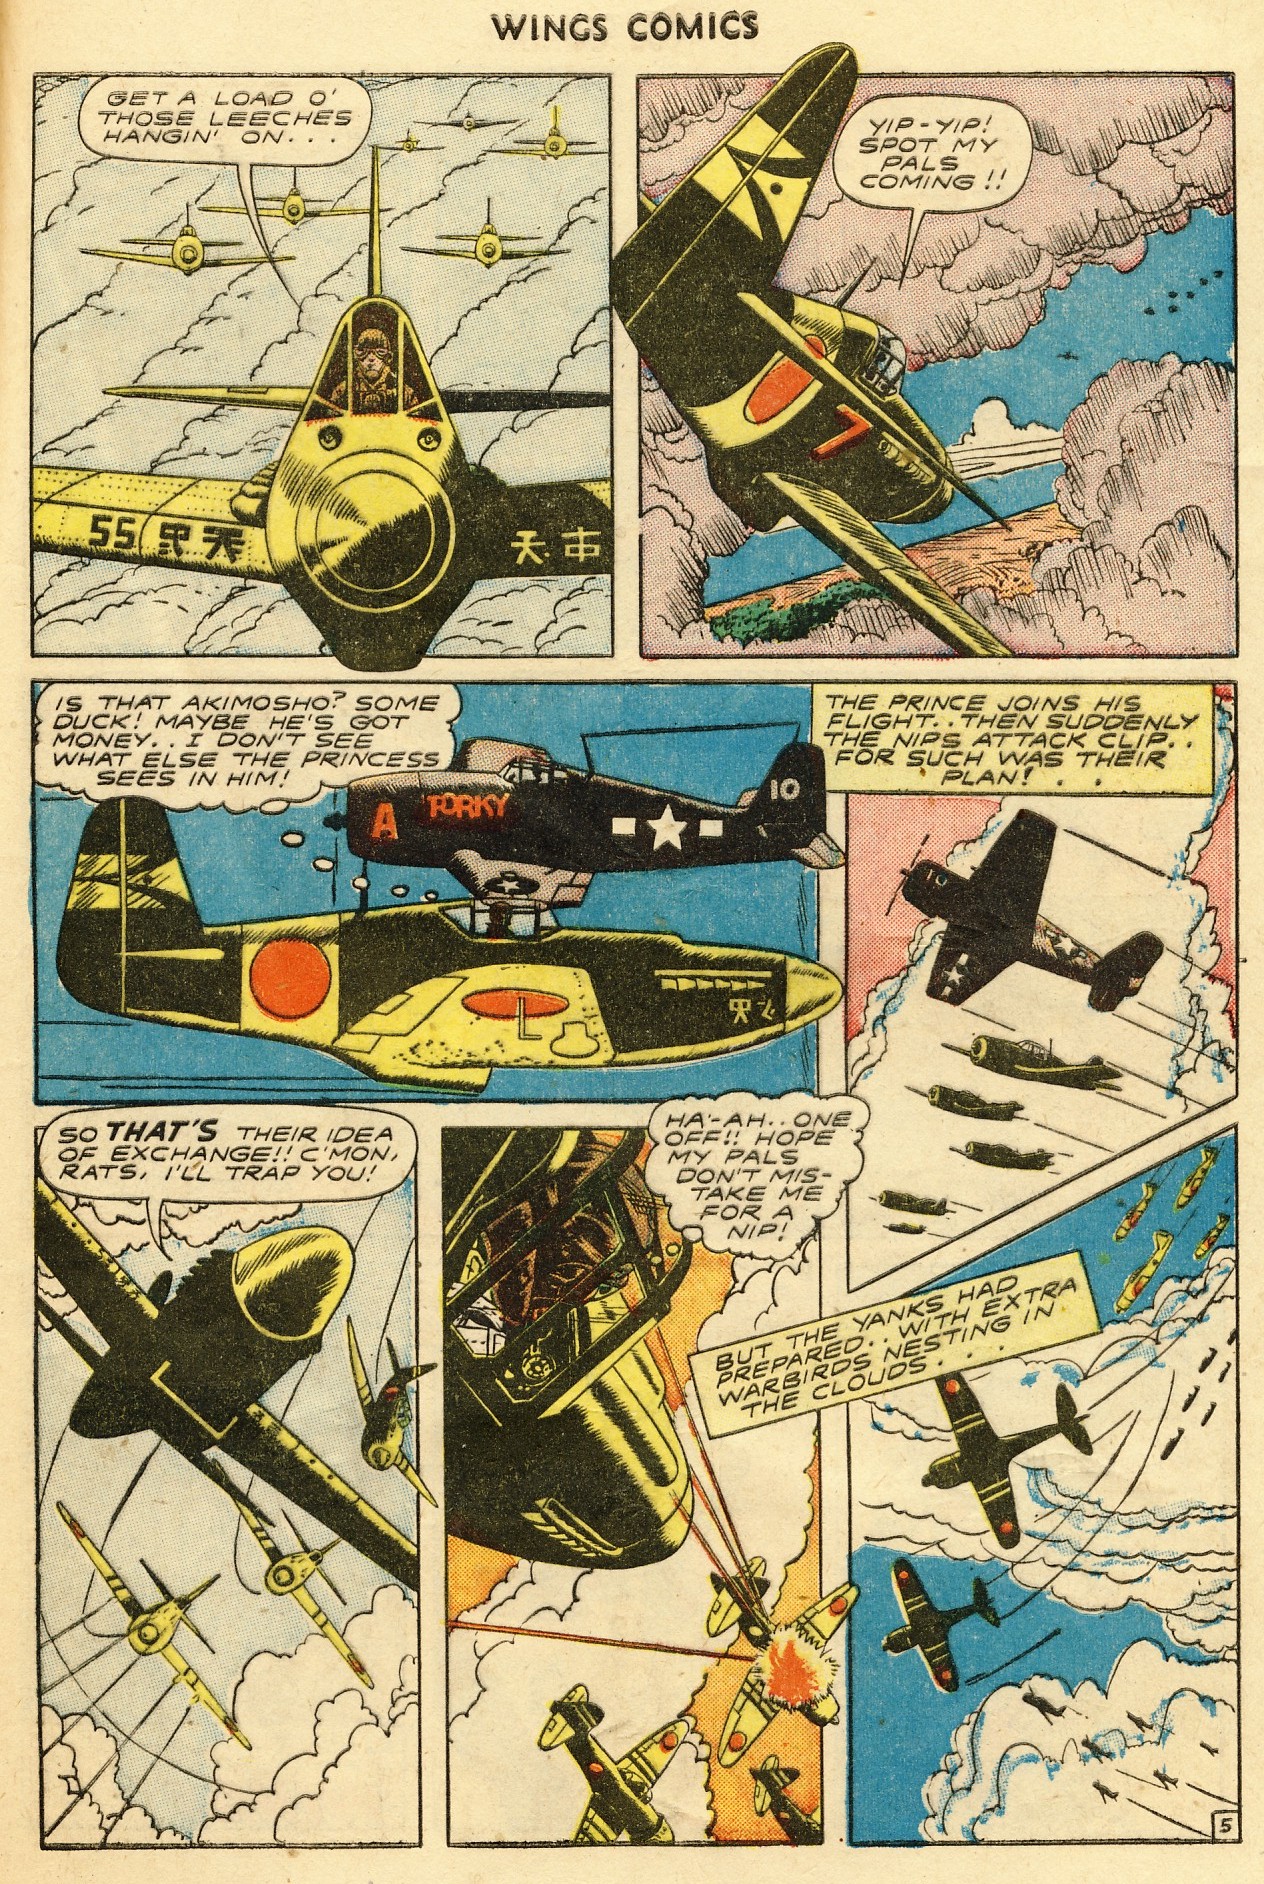 Read online Wings Comics comic -  Issue #61 - 33